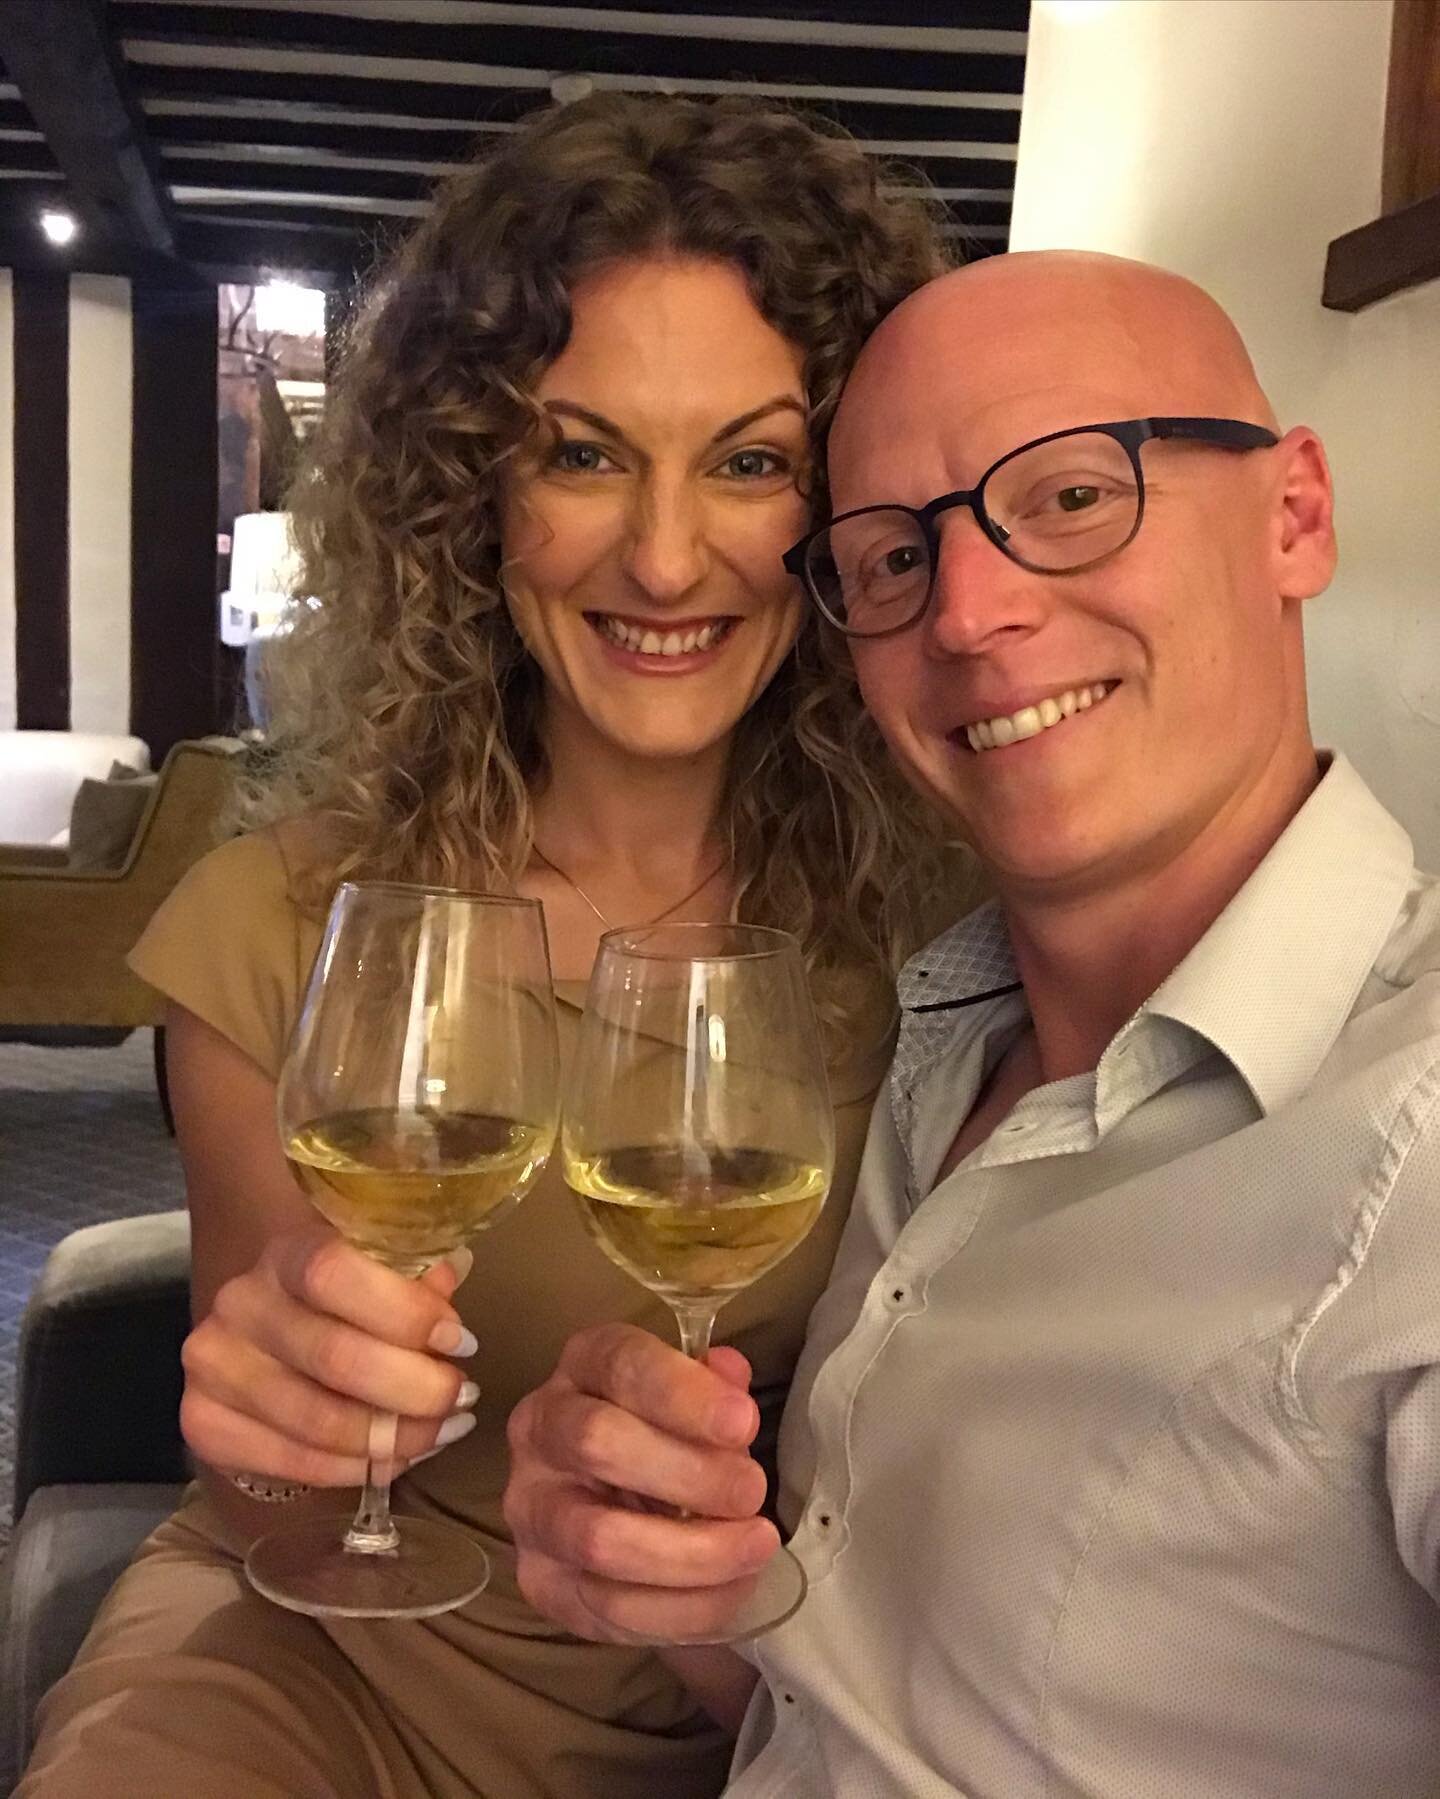 Night away with the wife @lavenhamswan 

@laura_frances_beauty 

#wife #staycation #2020 #lavenham #lavenhamswan #wine #loveher